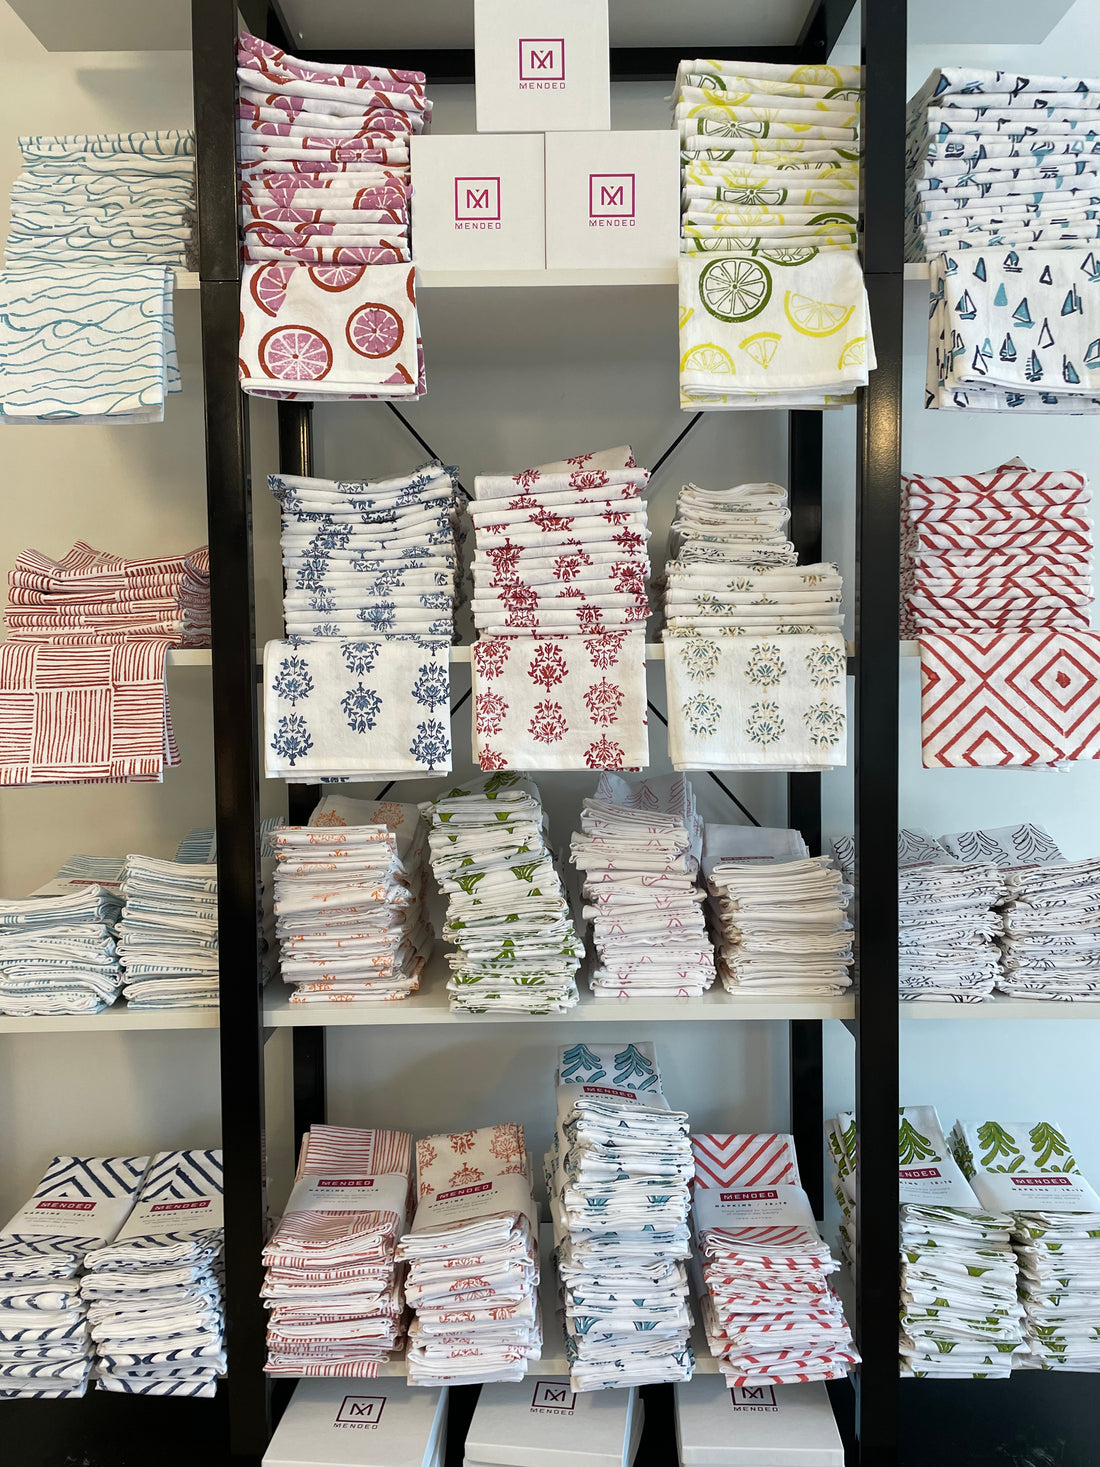 block printed tea towels and linens in Mended's new showroom